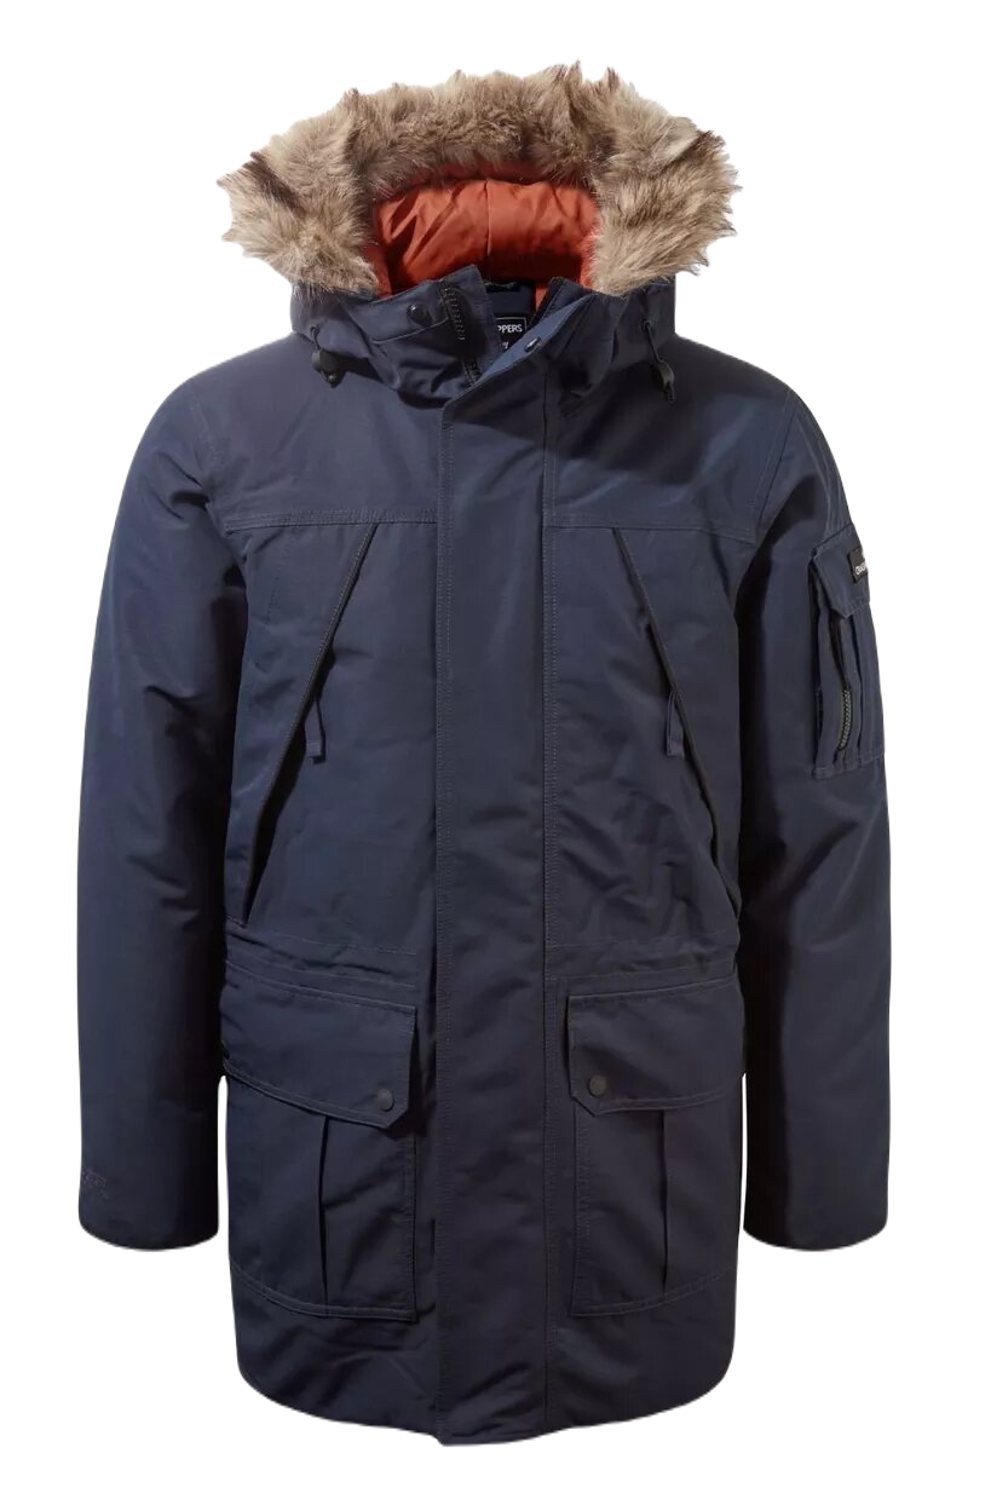 Craghoppers Bishorn II Insulated Jacket – Hollands Country Clothing